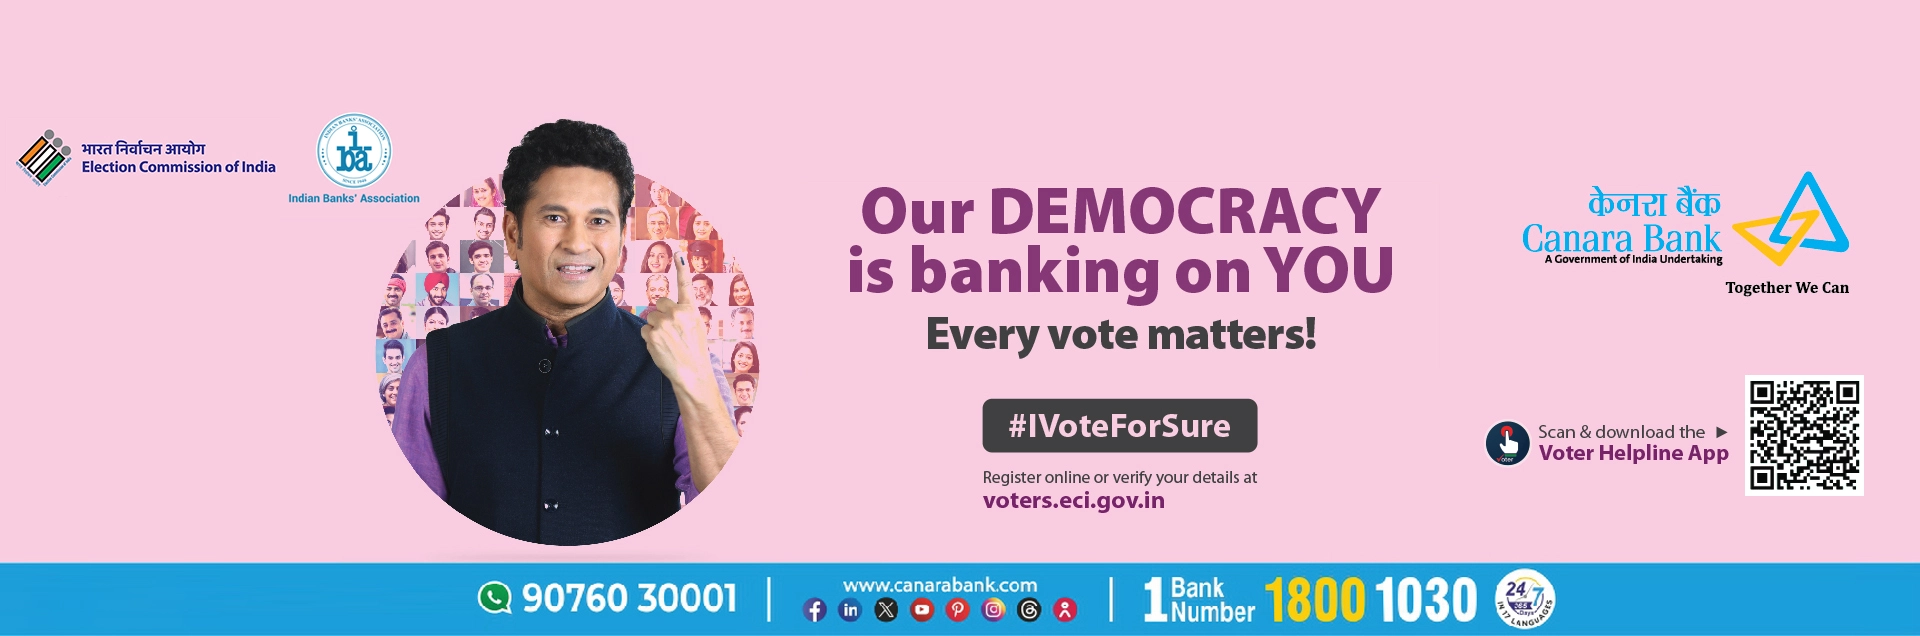 Vote for sure banner